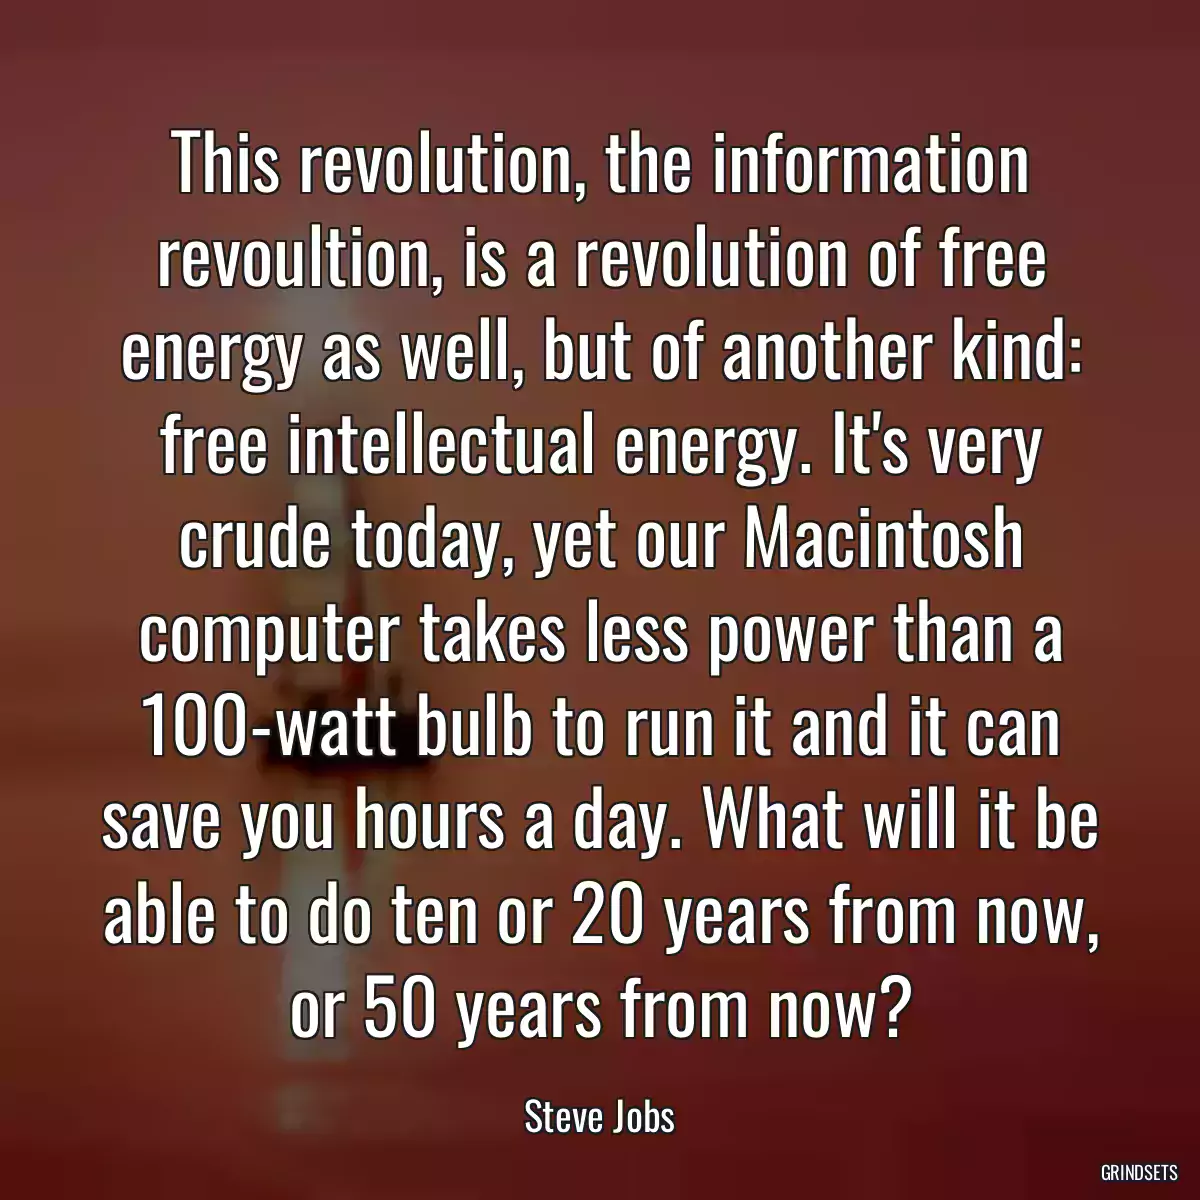 This revolution, the information revoultion, is a revolution of free energy as well, but of another kind: free intellectual energy. It\'s very crude today, yet our Macintosh computer takes less power than a 100-watt bulb to run it and it can save you hours a day. What will it be able to do ten or 20 years from now, or 50 years from now?